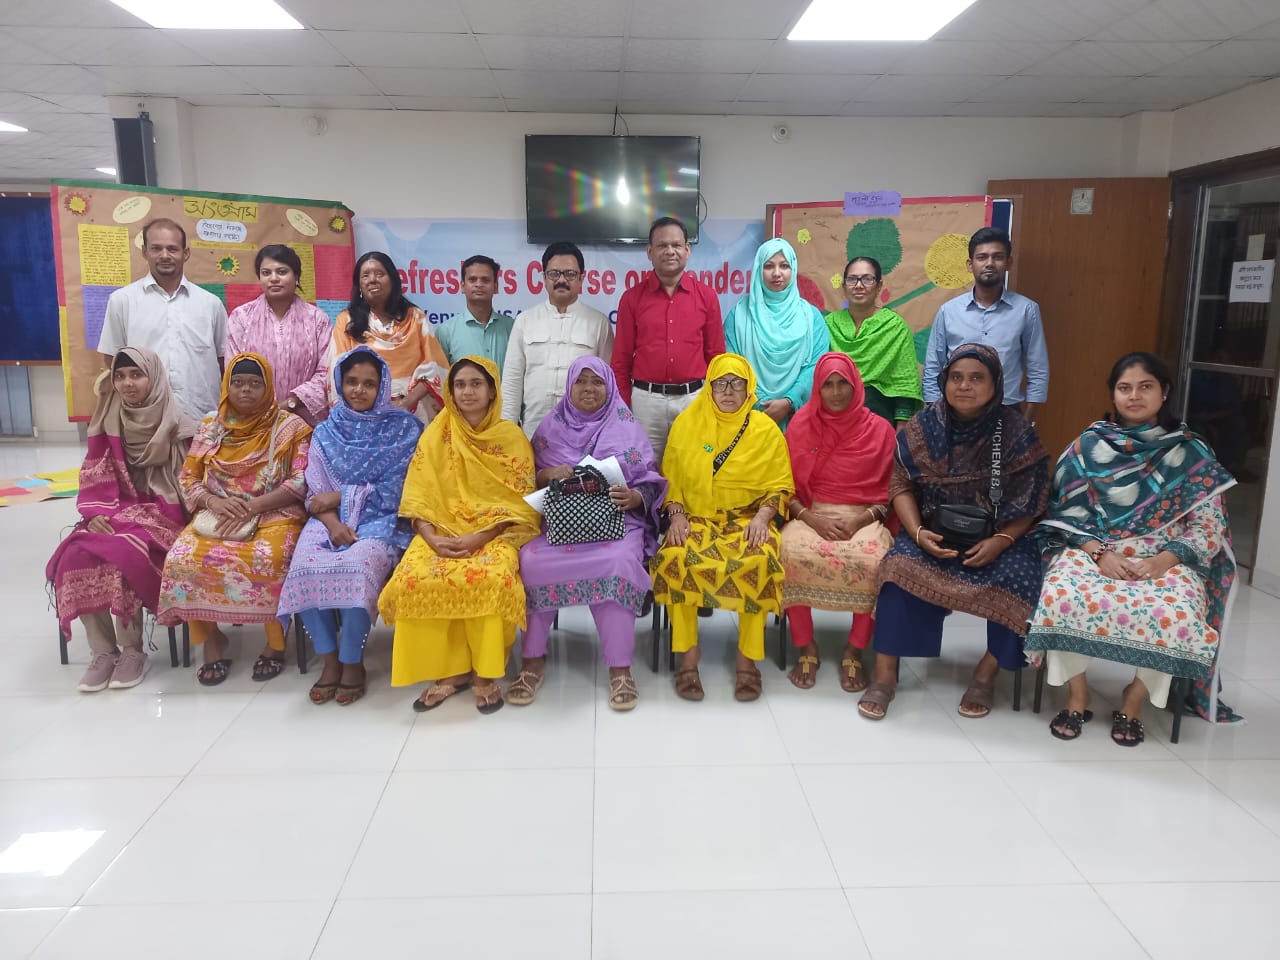 A two-day long ‘Refresher training on Gender project by Australian Government